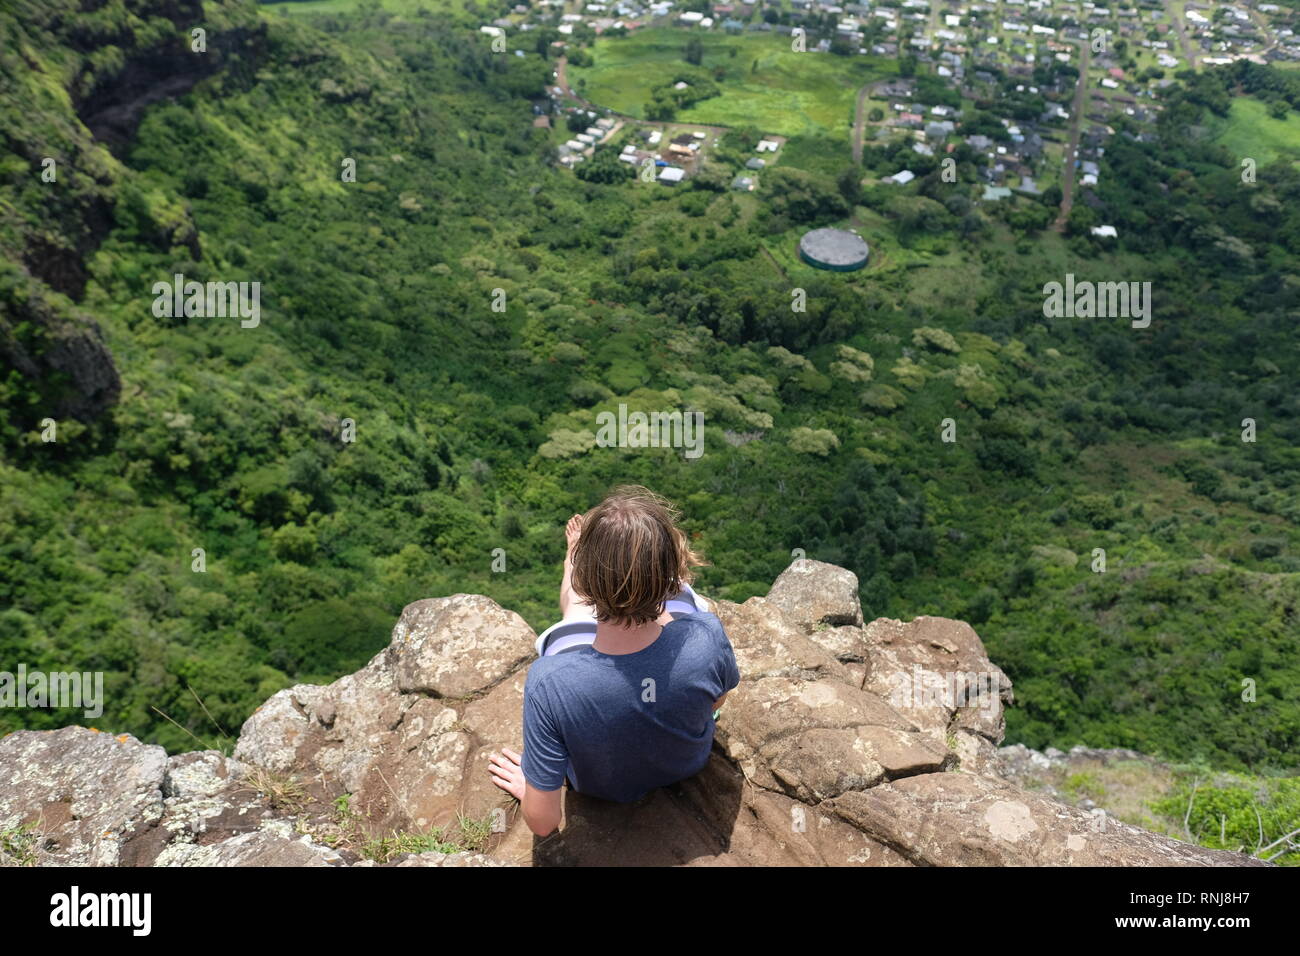 Boy on a cliffs edge overlooking a valley. The view is from the top of Sleeping Giant hiking trail on the island of Kaua'i, Hawaii. Stock Photo